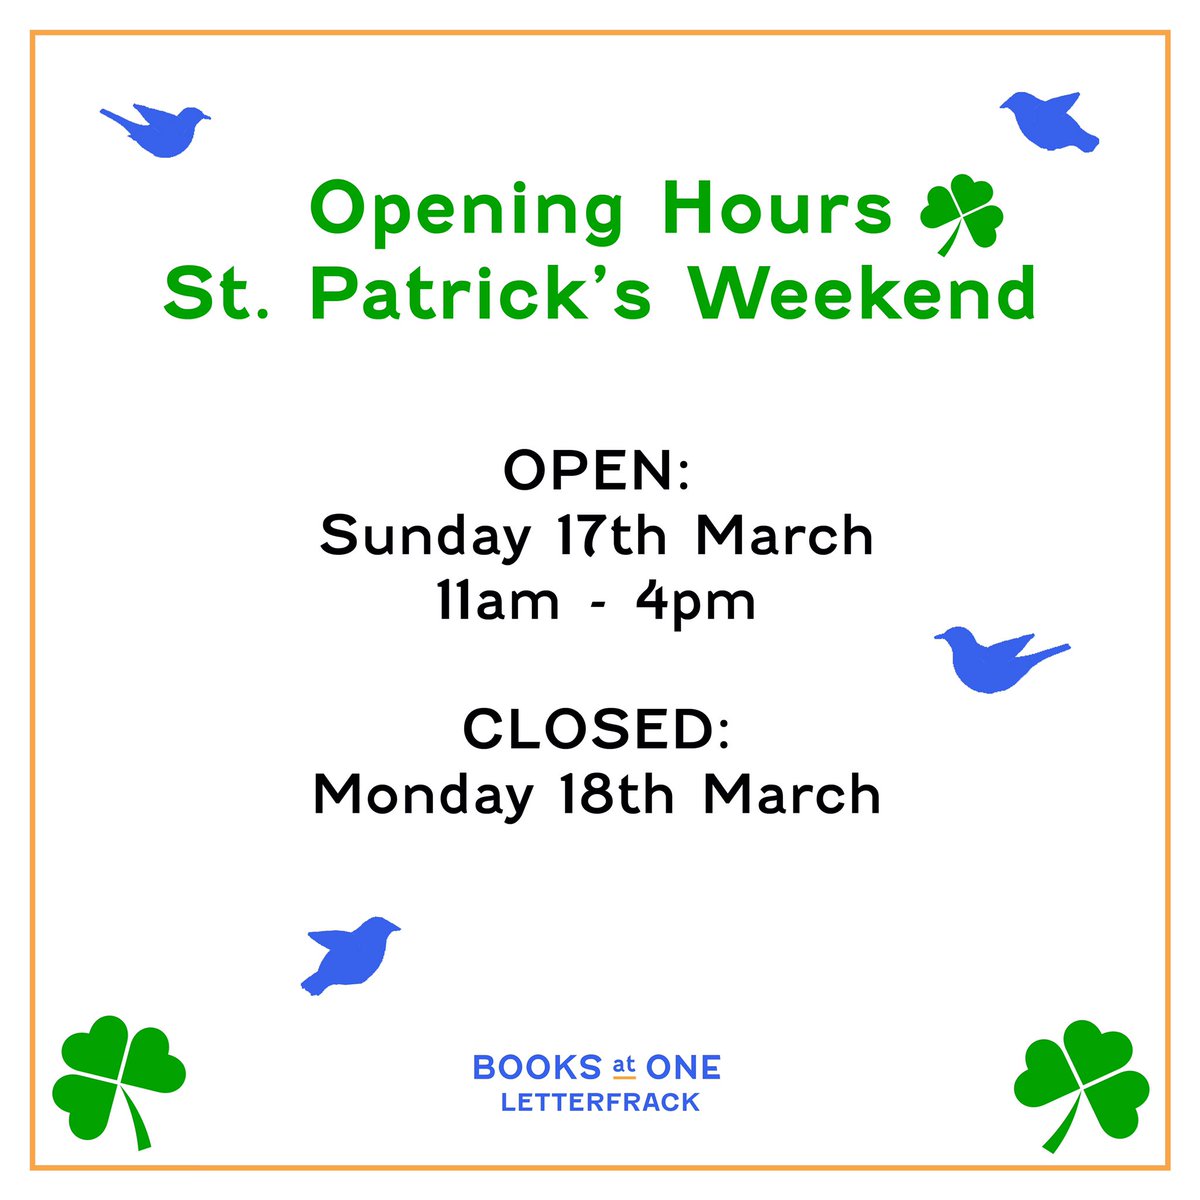 Opening hours this weekend! Open Saturday as usual, Sunday 11am - 4pm, closed Monday ☘️☘️